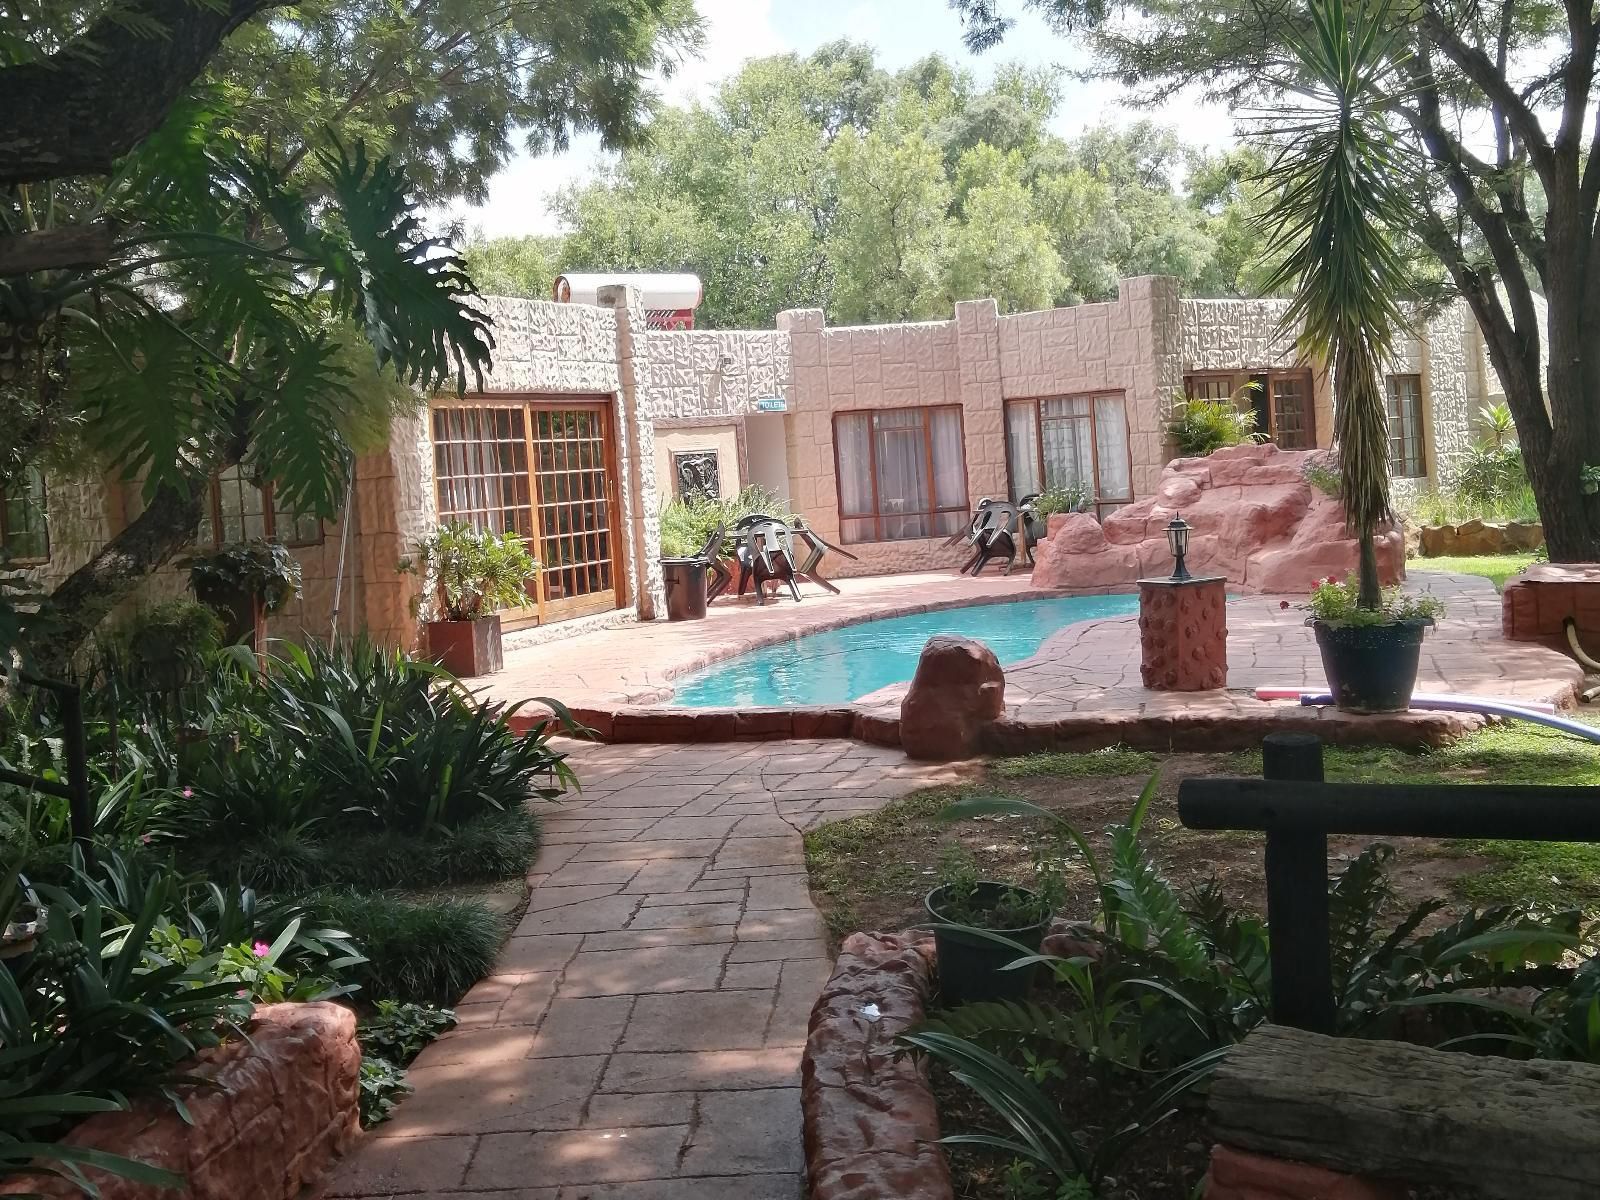 Lindleyspoort Guest House Swartruggens North West Province South Africa House, Building, Architecture, Palm Tree, Plant, Nature, Wood, Garden, Swimming Pool